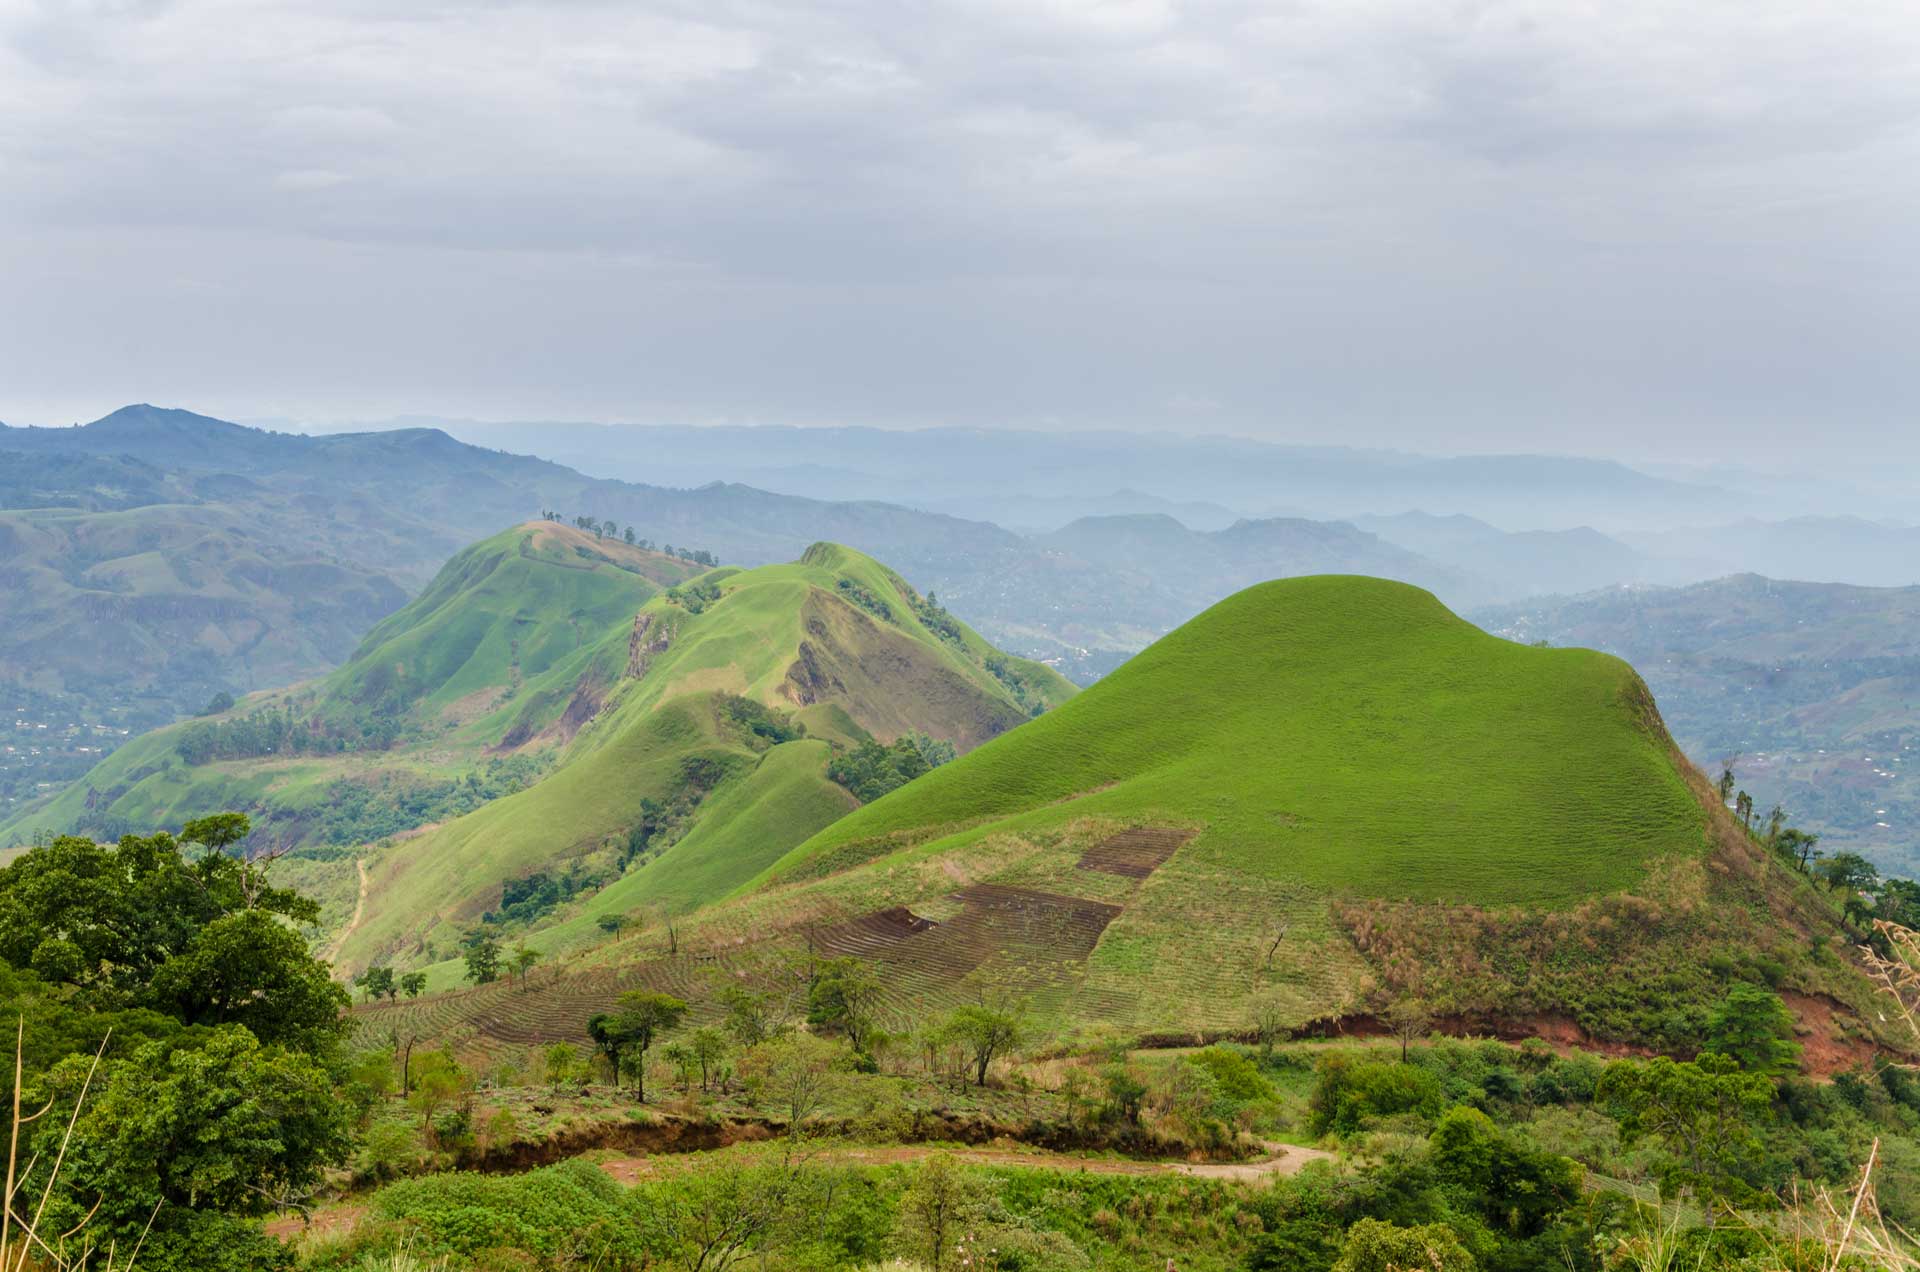 Rolling fertile hills with fields and crops on Ring Road of Cameroon, Africa